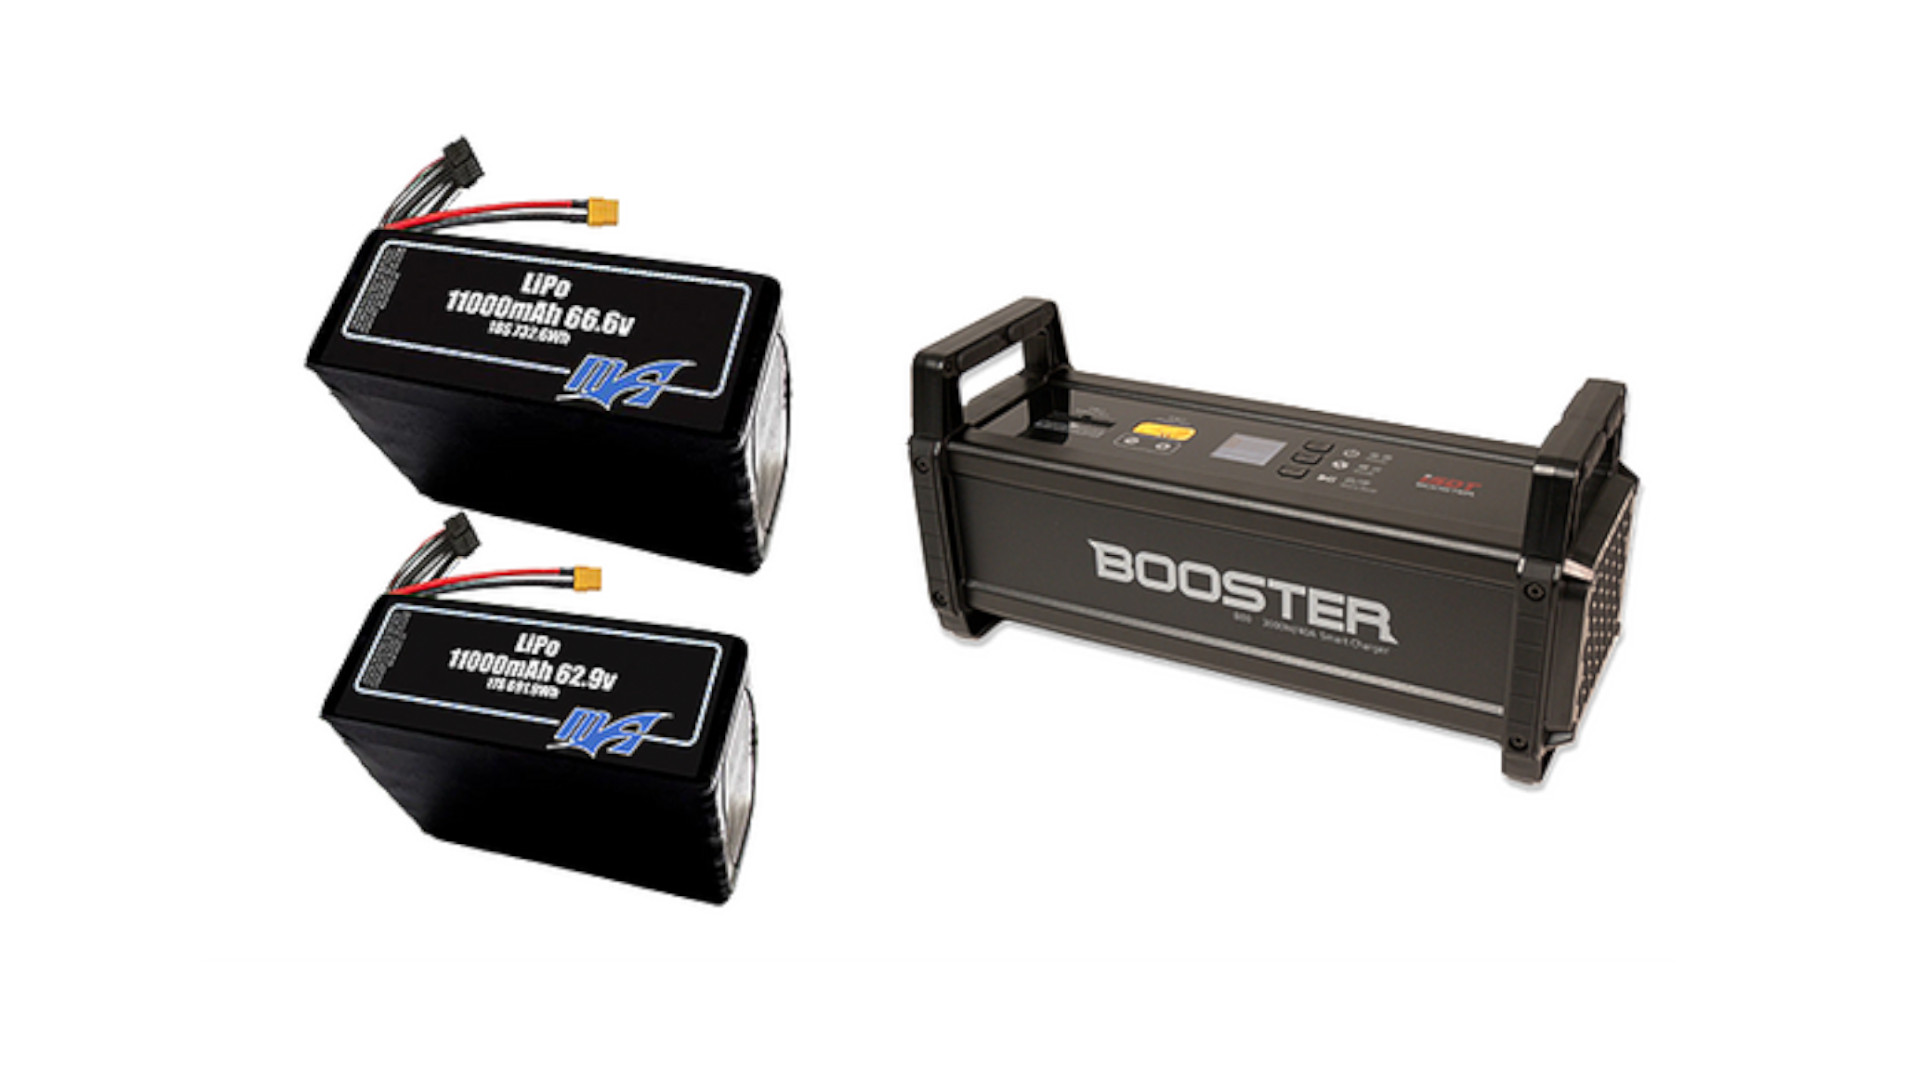 MaxAmps 17S & 18S Batteries & ISDT B80 Charger